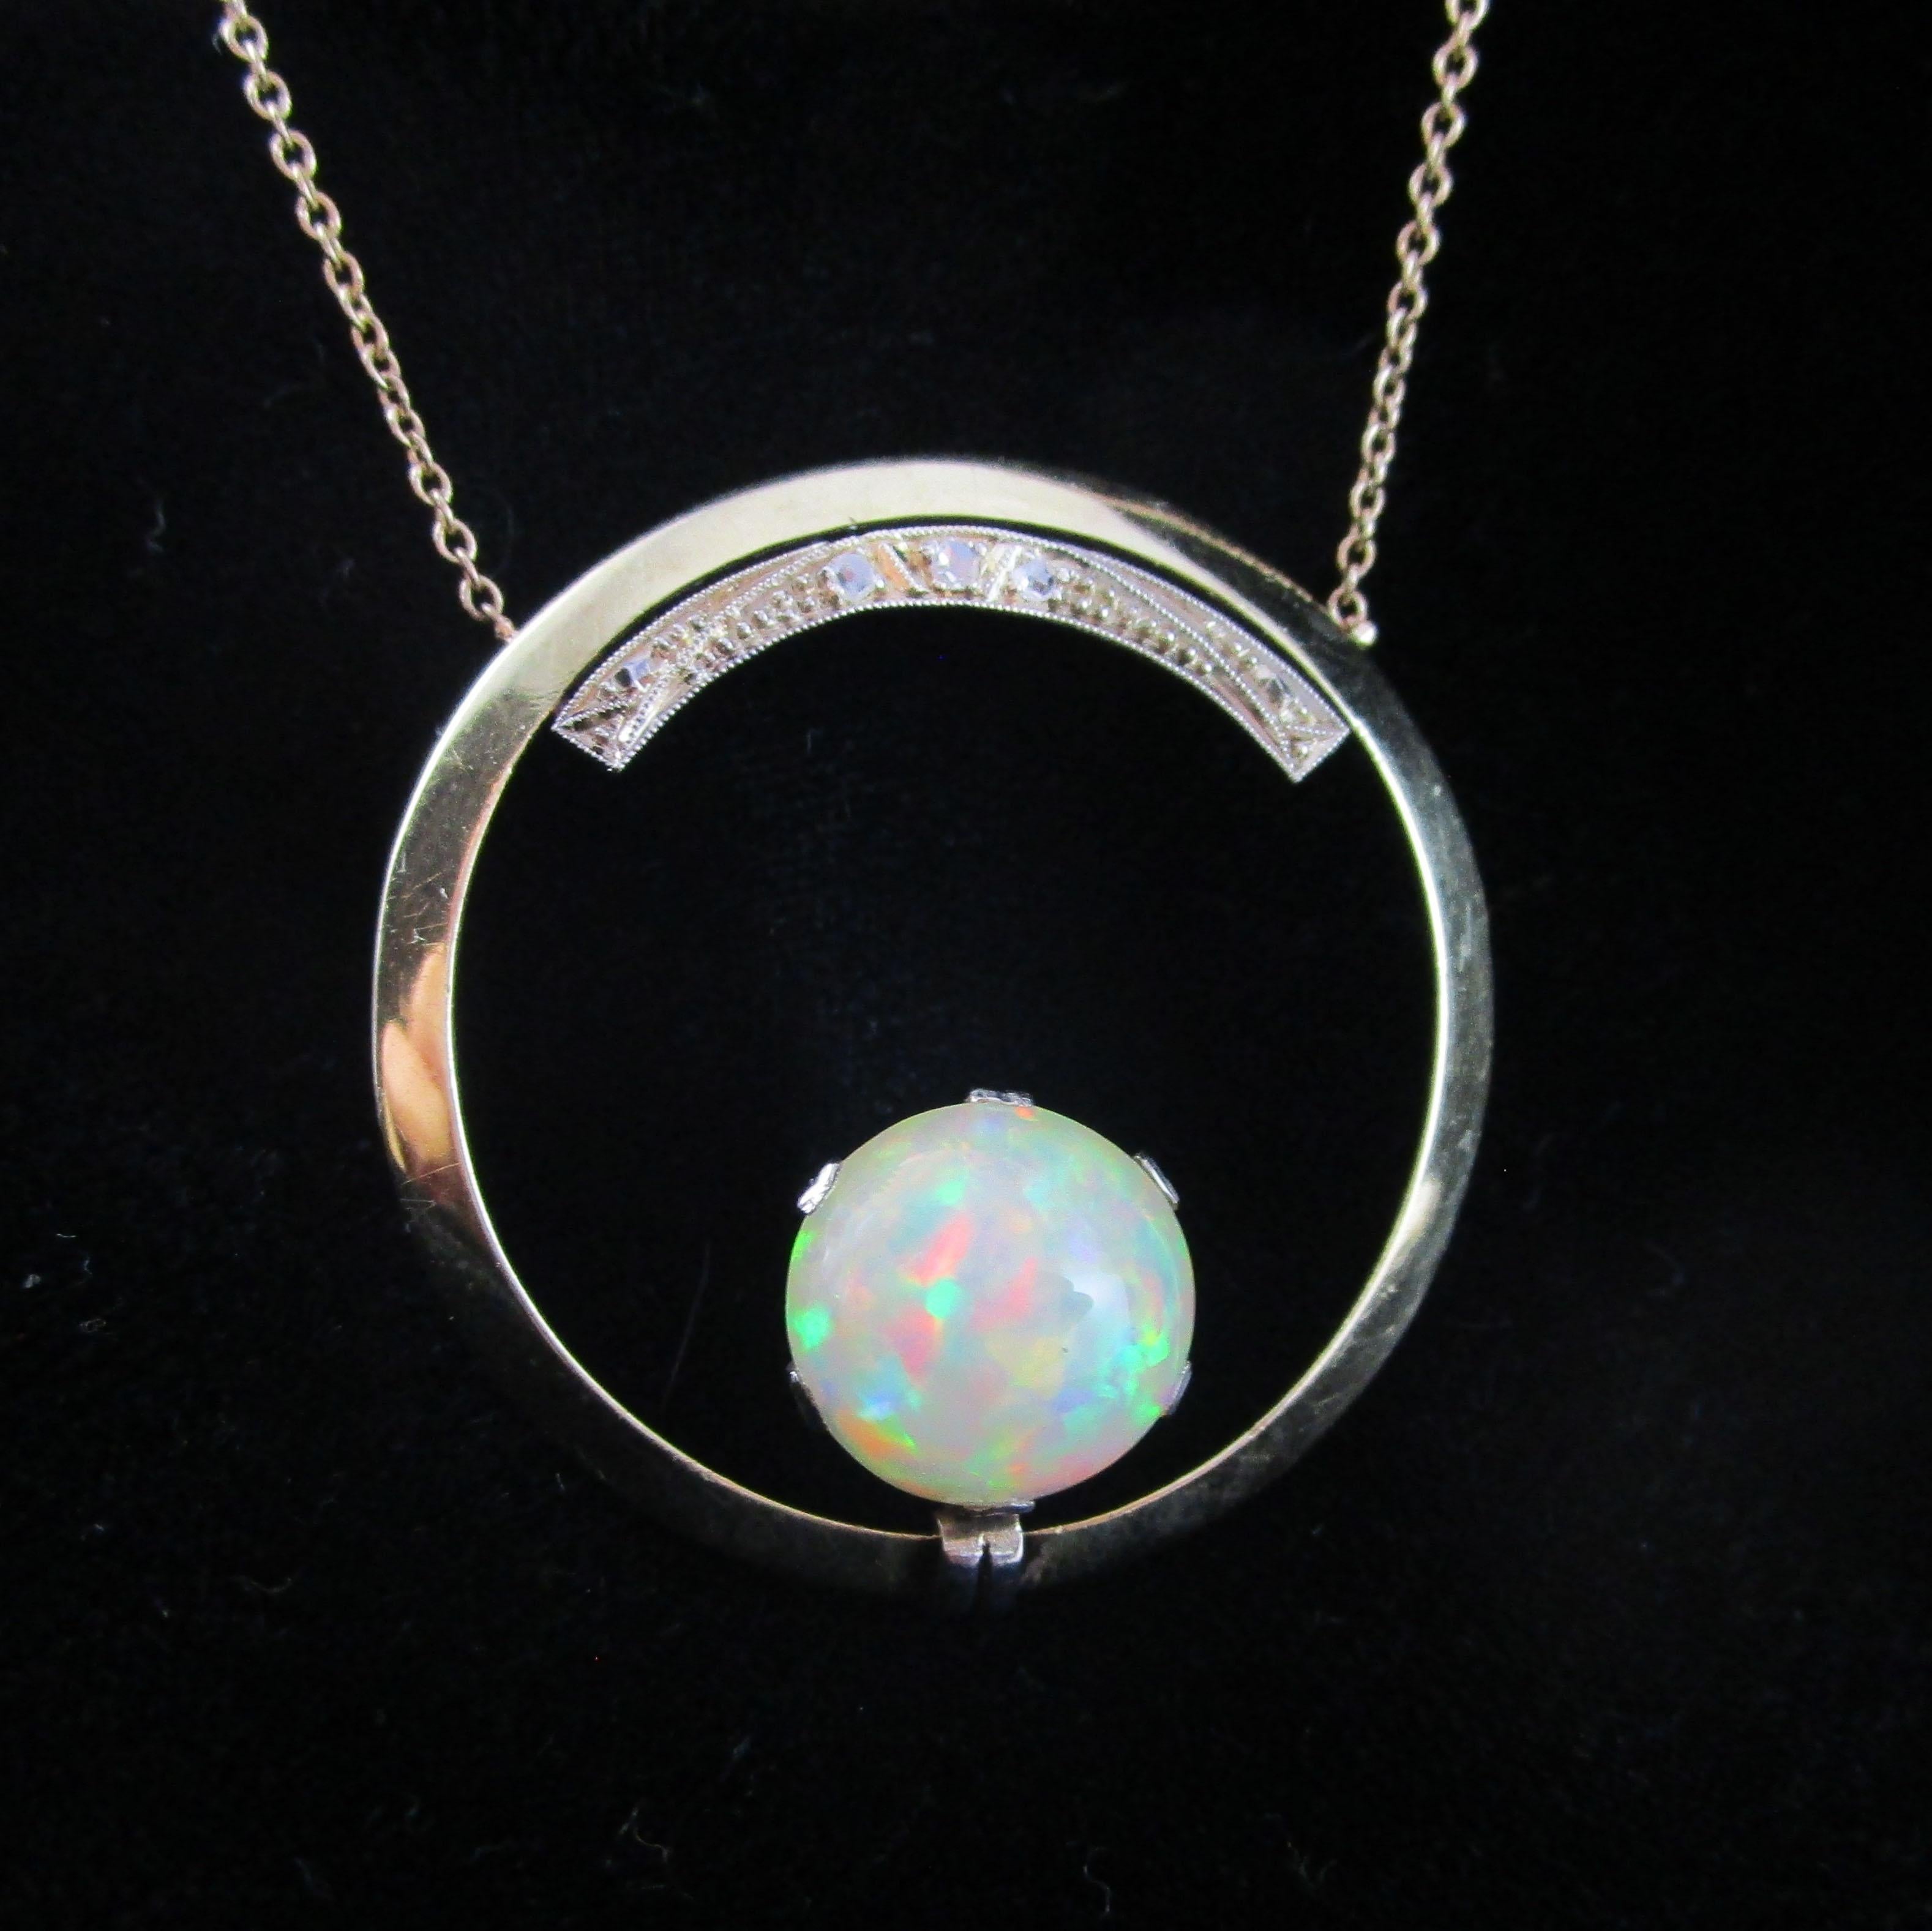 1925 Art Deco 14k Yellow Gold Diamond and Opal Circle Necklace For Sale 2